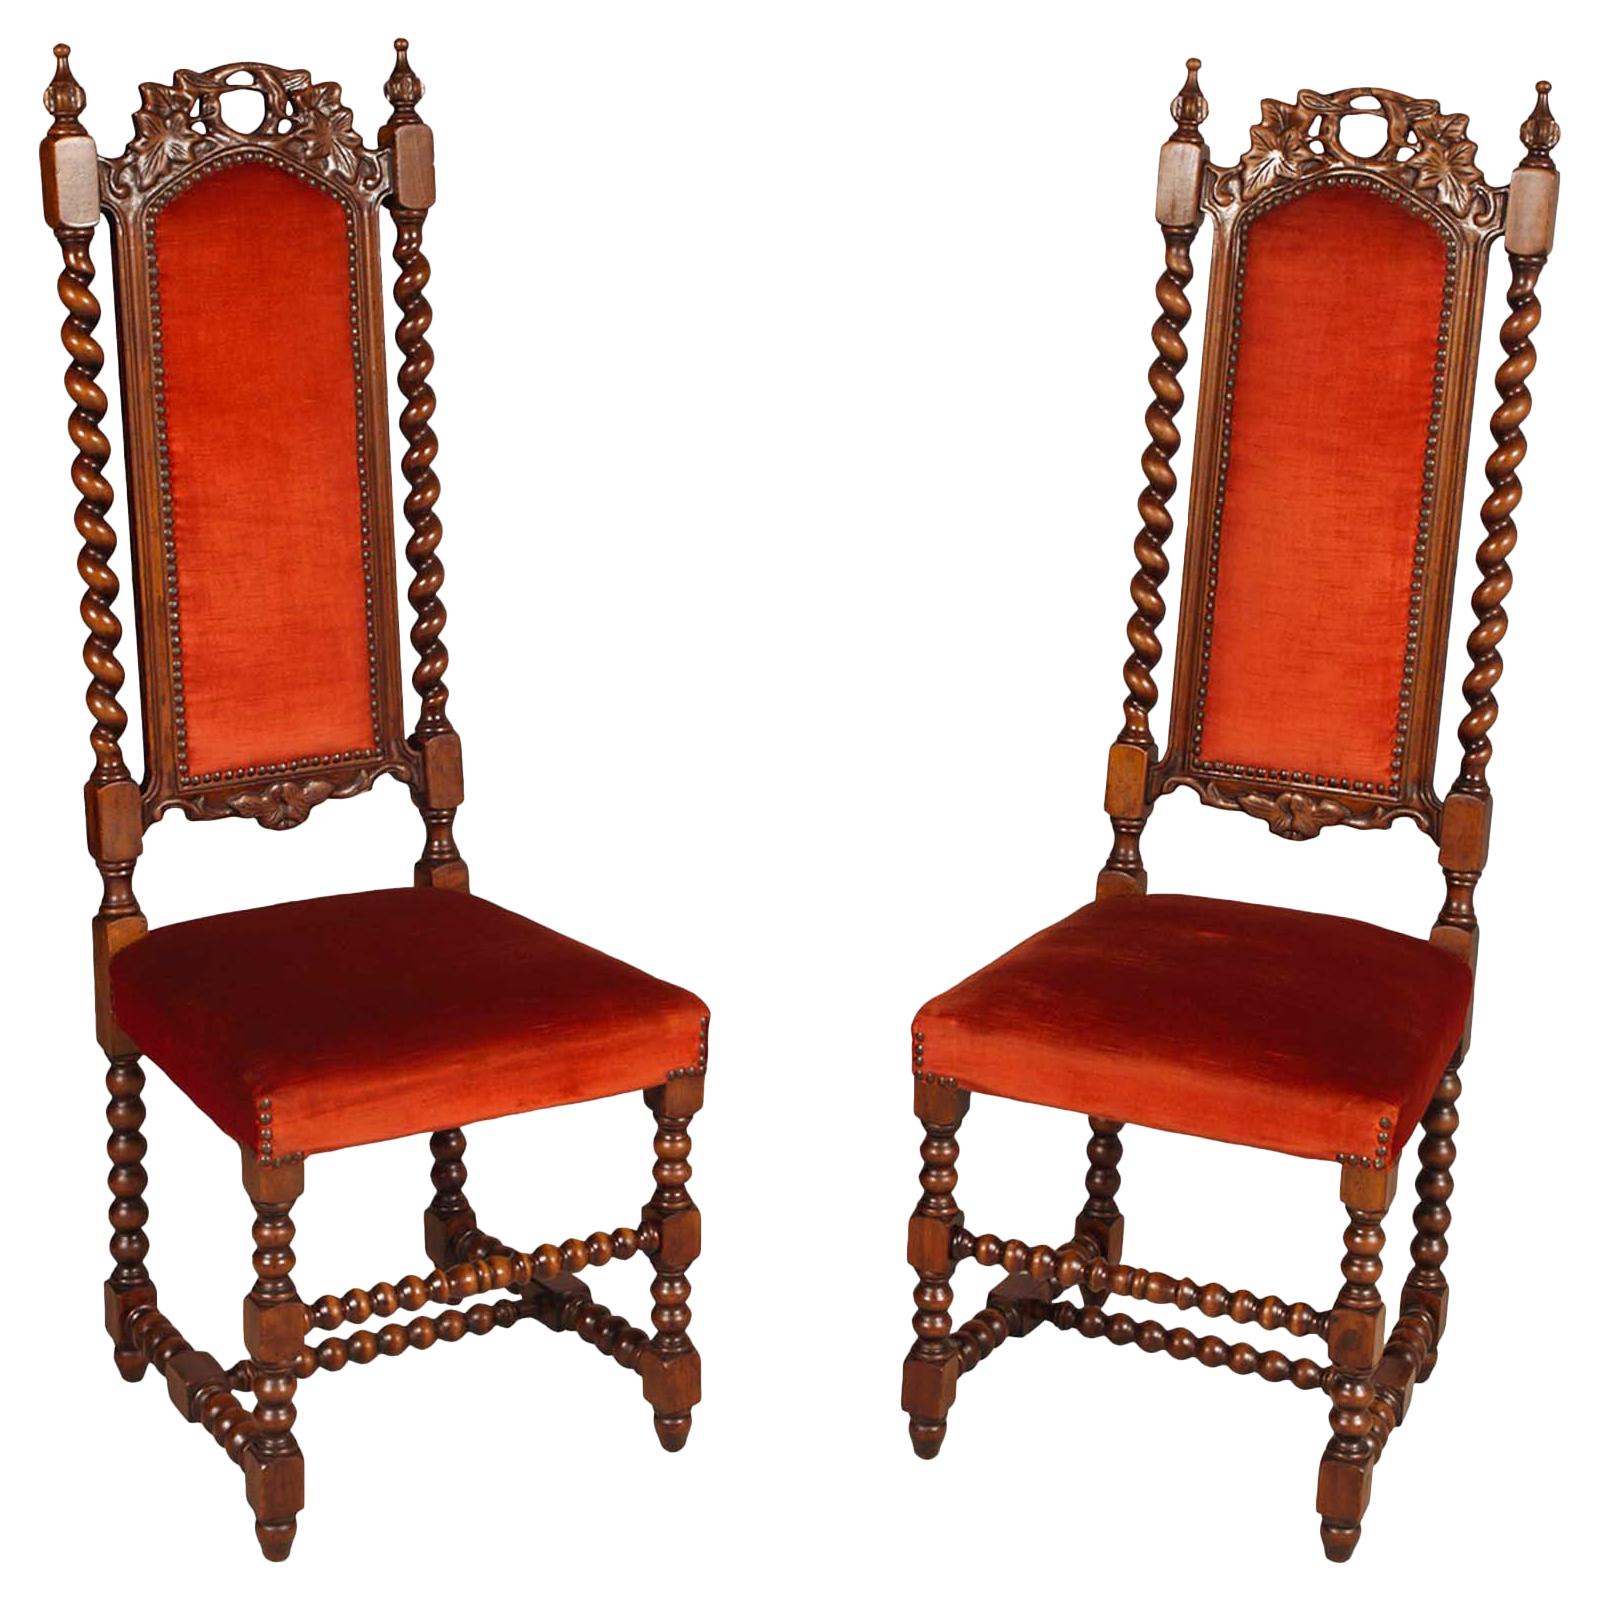 Pairs 19th Century Venetian Hall Chairs by Atelier Cadorin, Walnut , Hand Carved